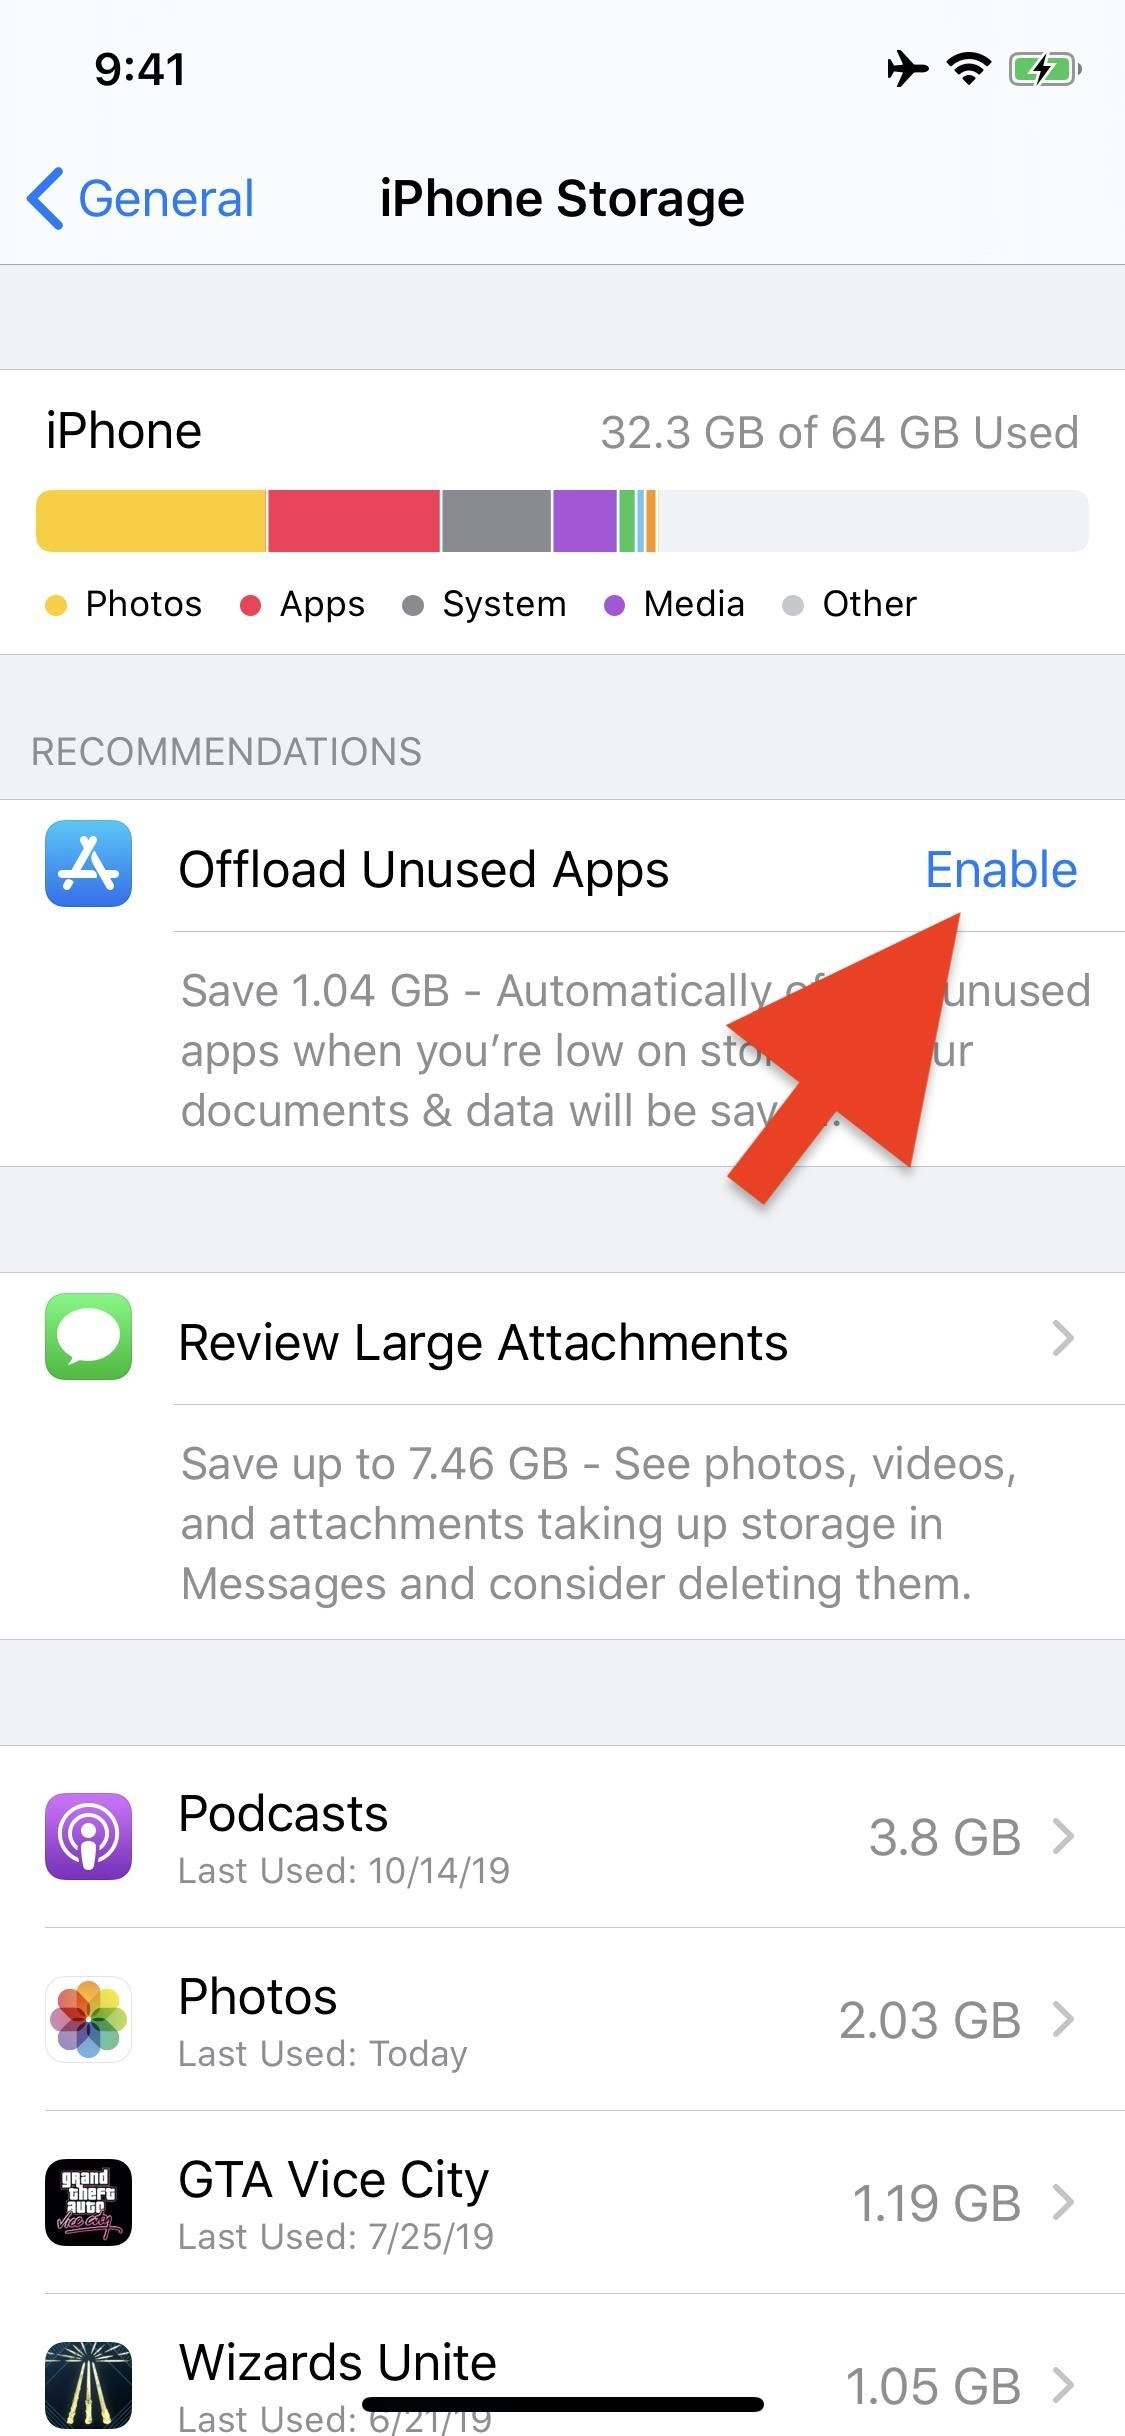 Optimize storage: Utilize the built-in storage management tools to automatically free up space on your iPhone or USB storage device.
Offload unused apps: Remove apps that you seldom use, while keeping their documents and data intact, to reclaim valuable storage space.